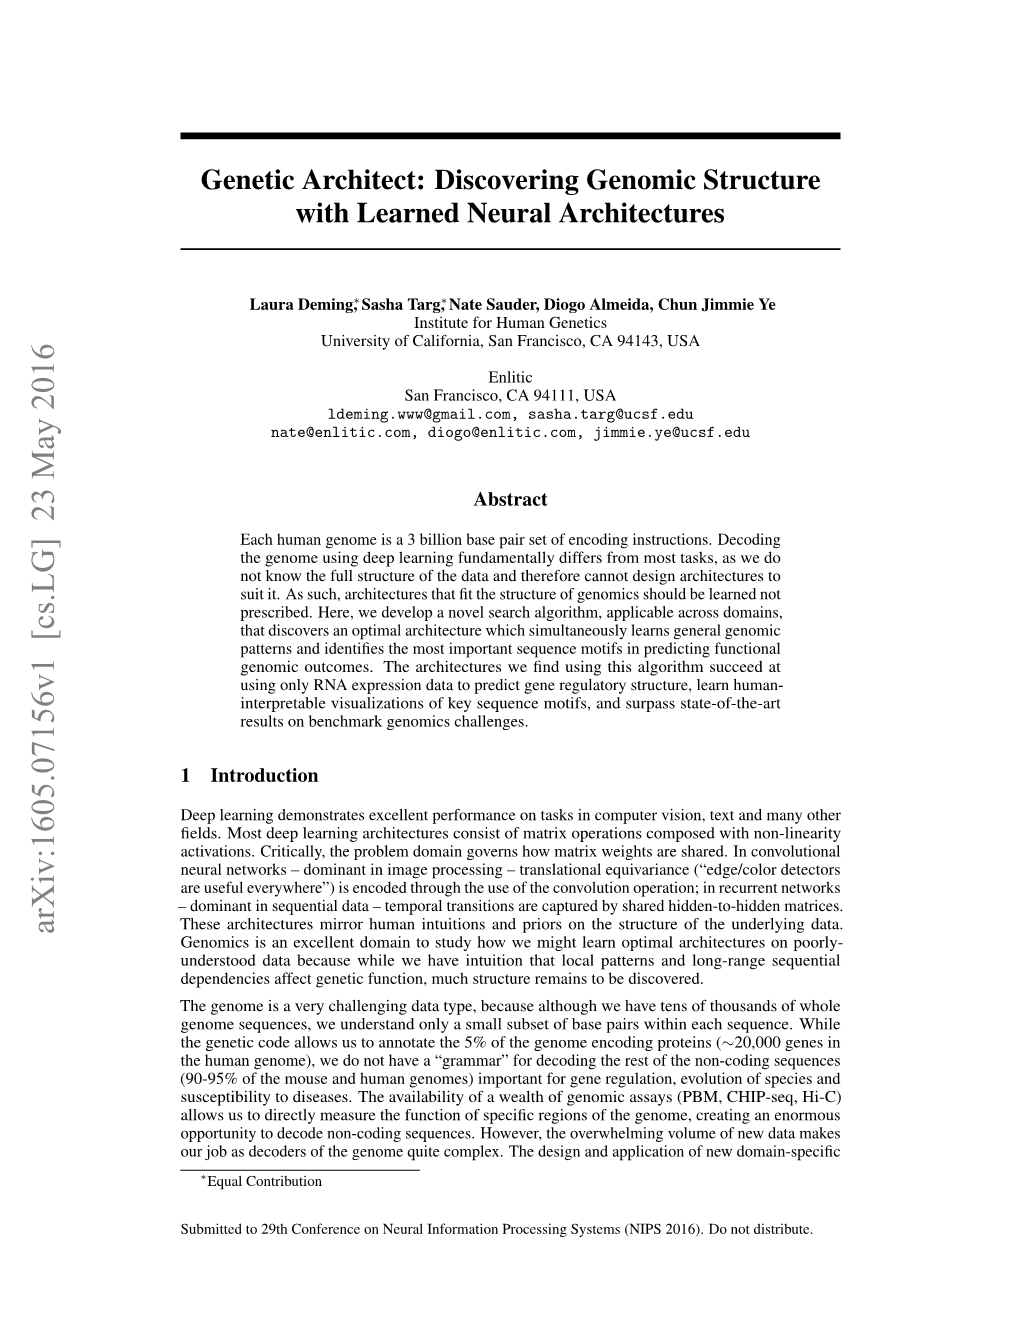 Discovering Genomic Structure with Learned Neural Architectures